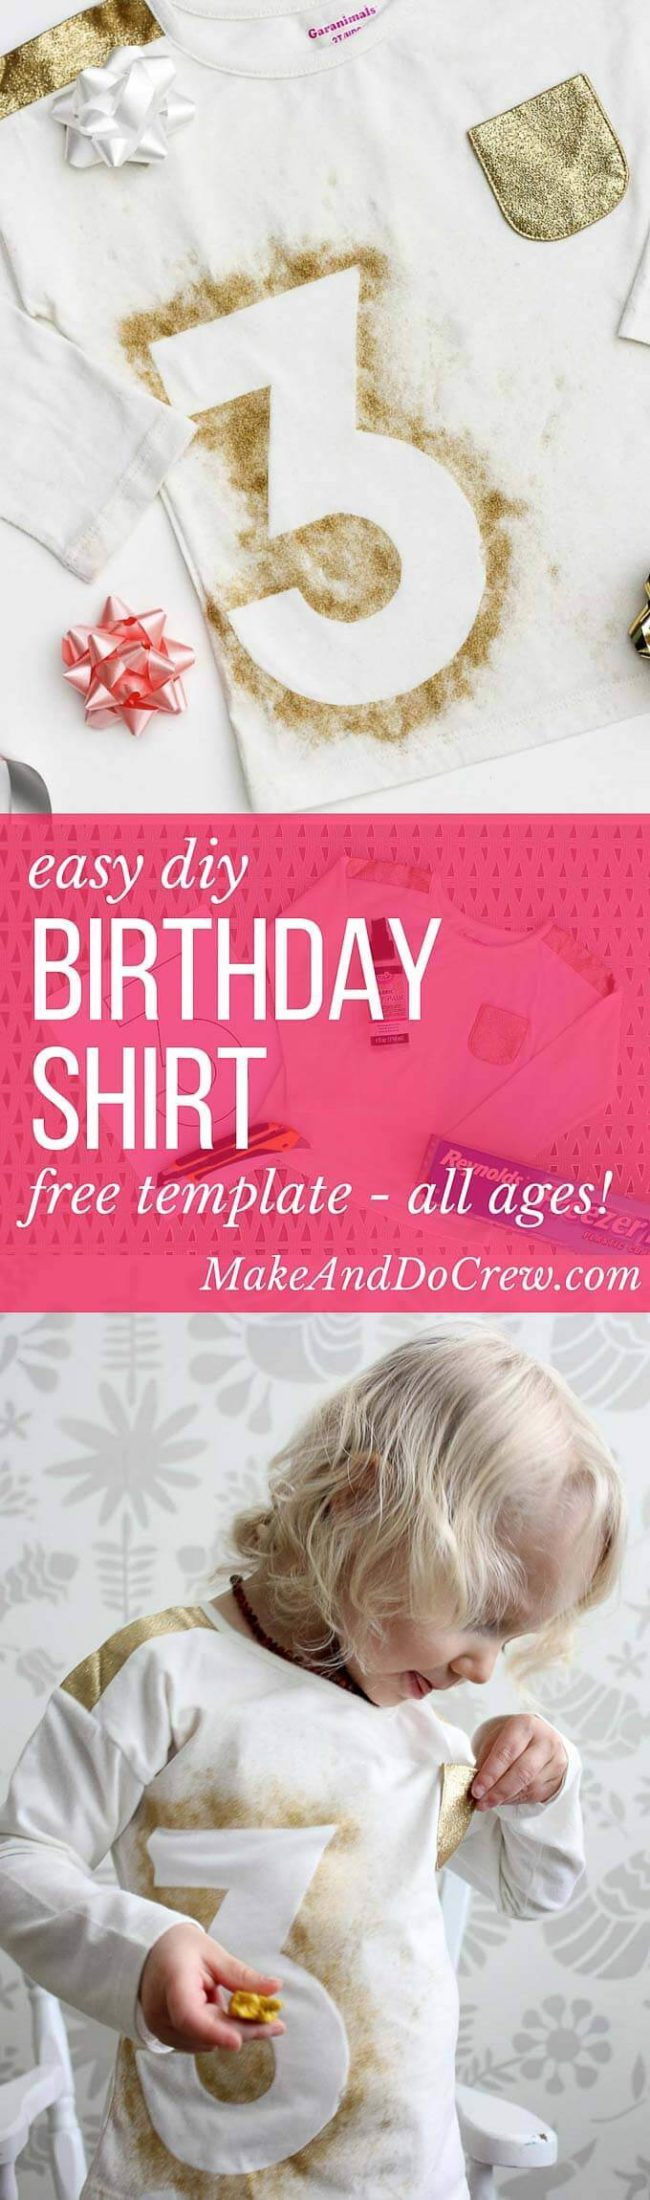 DIY Birthday Shirts For Toddlers
 Personalized DIY Kids Birthday Shirt Idea Make It To her